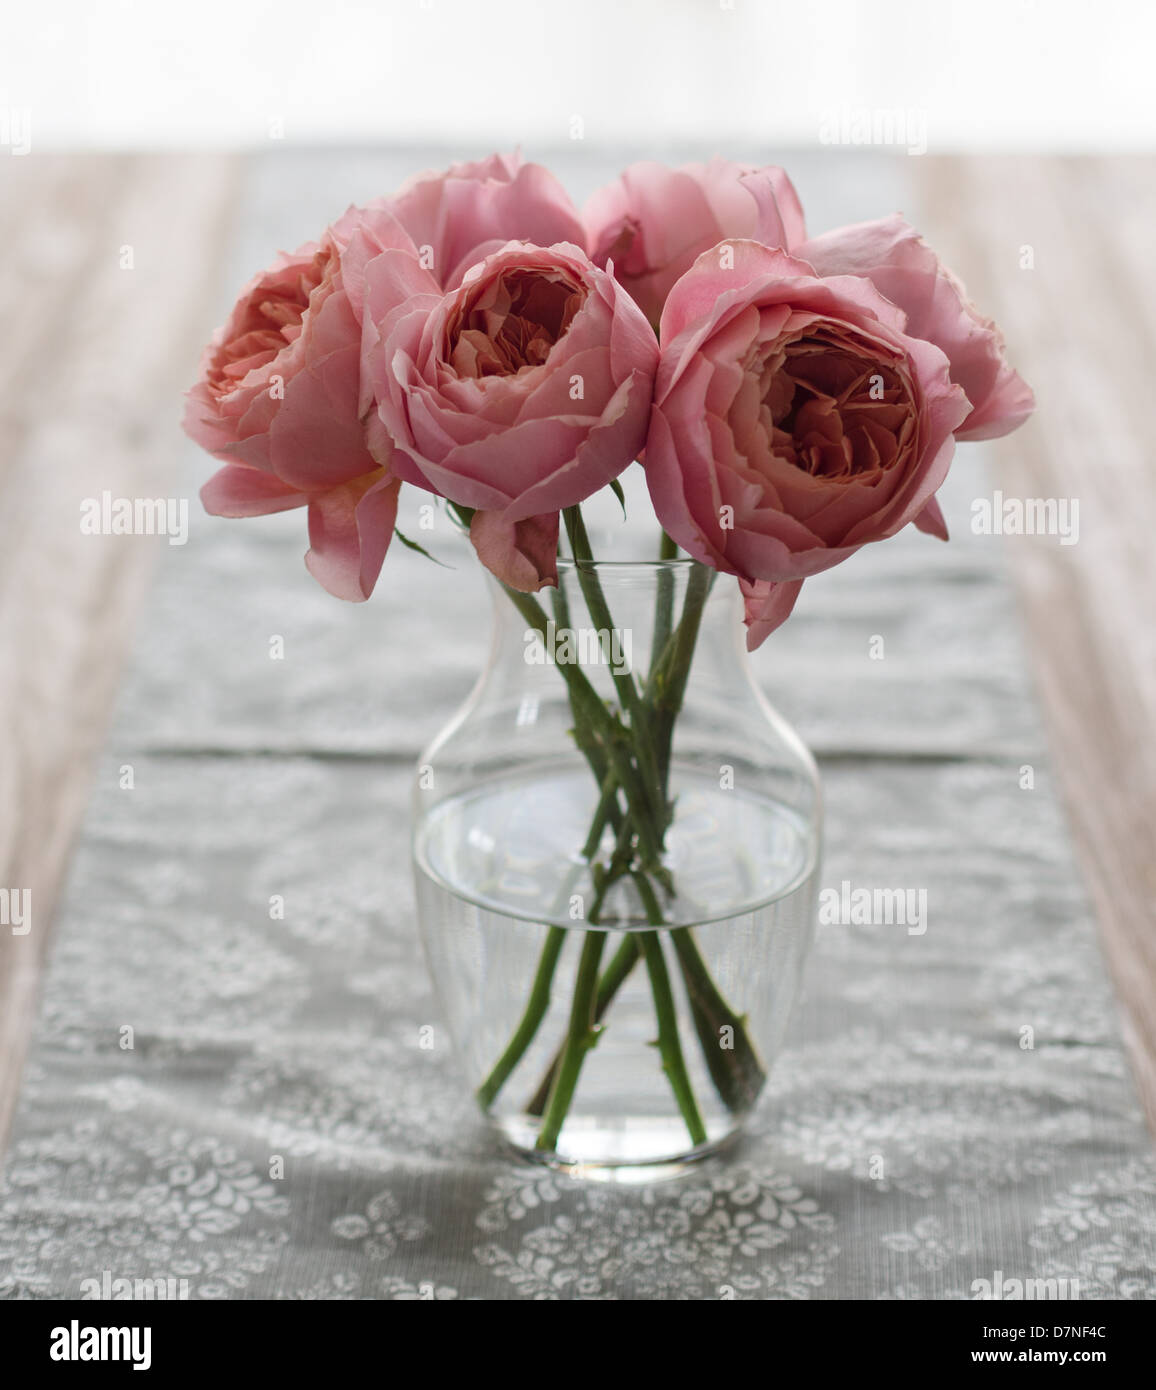 Pink peonies in a vase Stock Photo